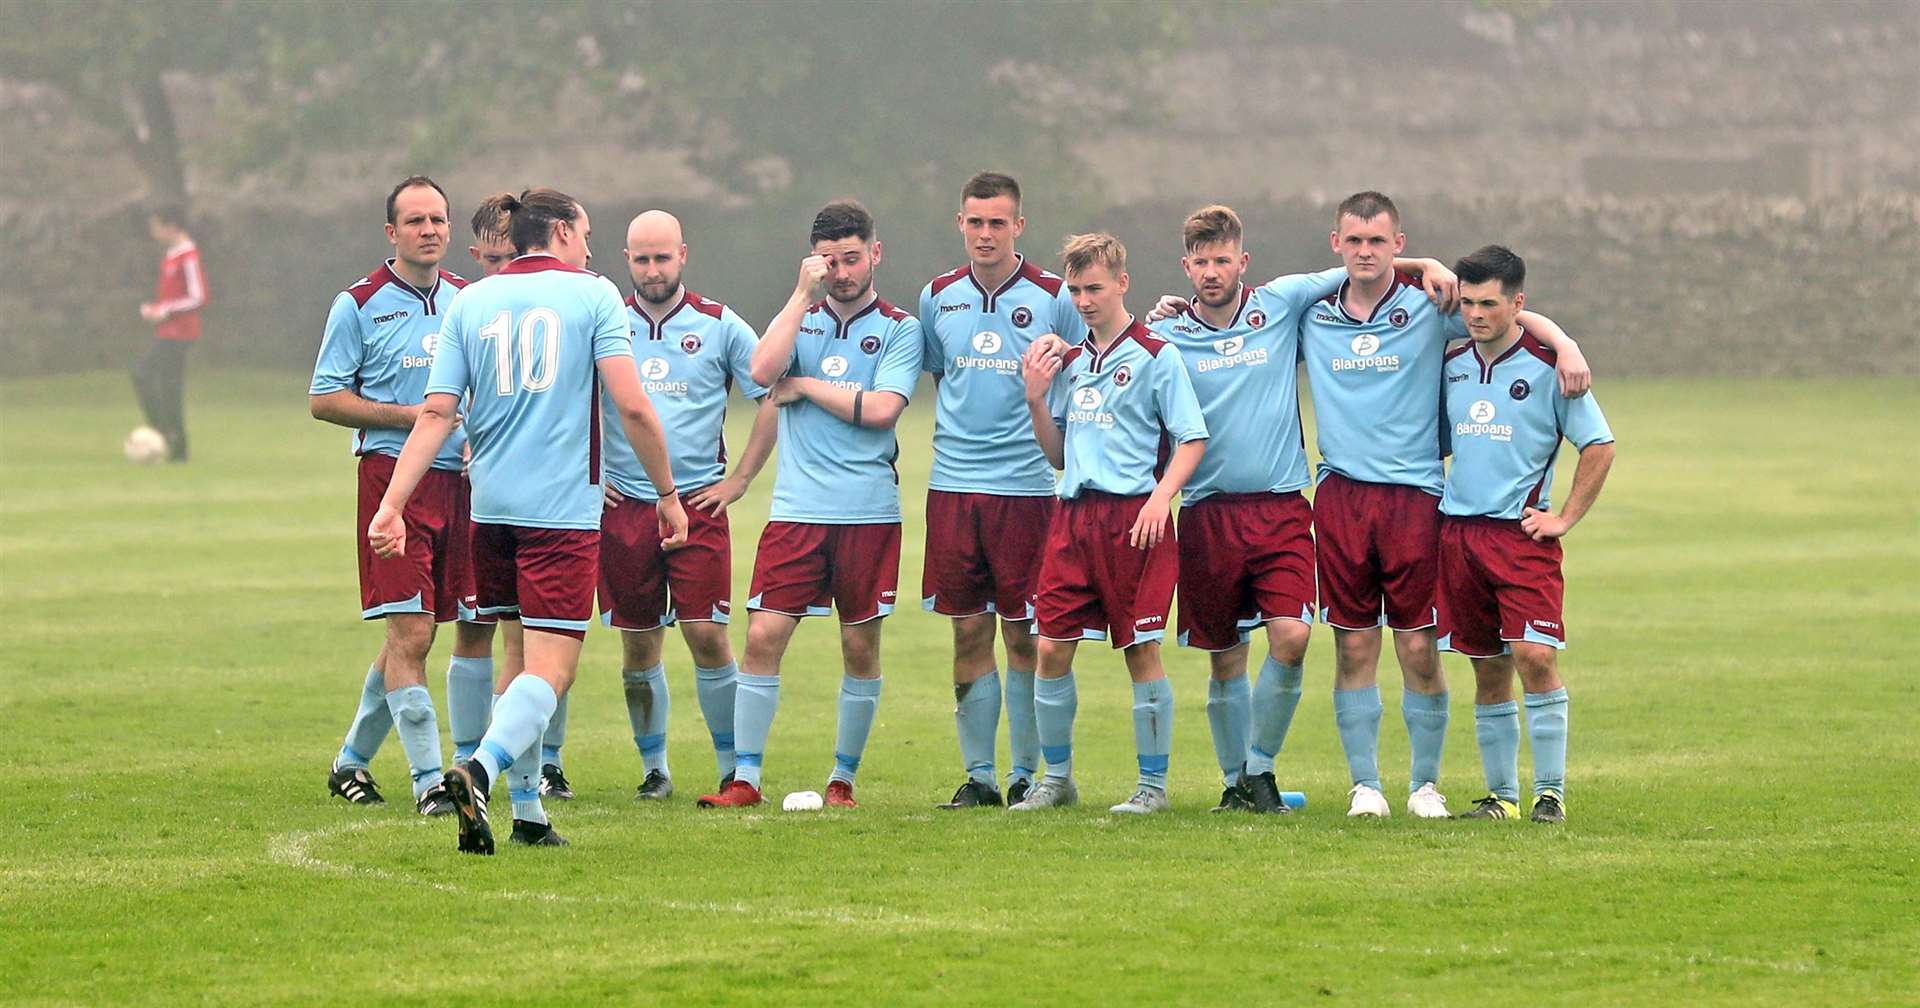 Pentland United's James Maclean walks back to his team mates after his penalty miss against Wick Groats which proved pivotal as his side lost the shootout, and the Highland Amateur Cup semi-final. Picture: James Gunn